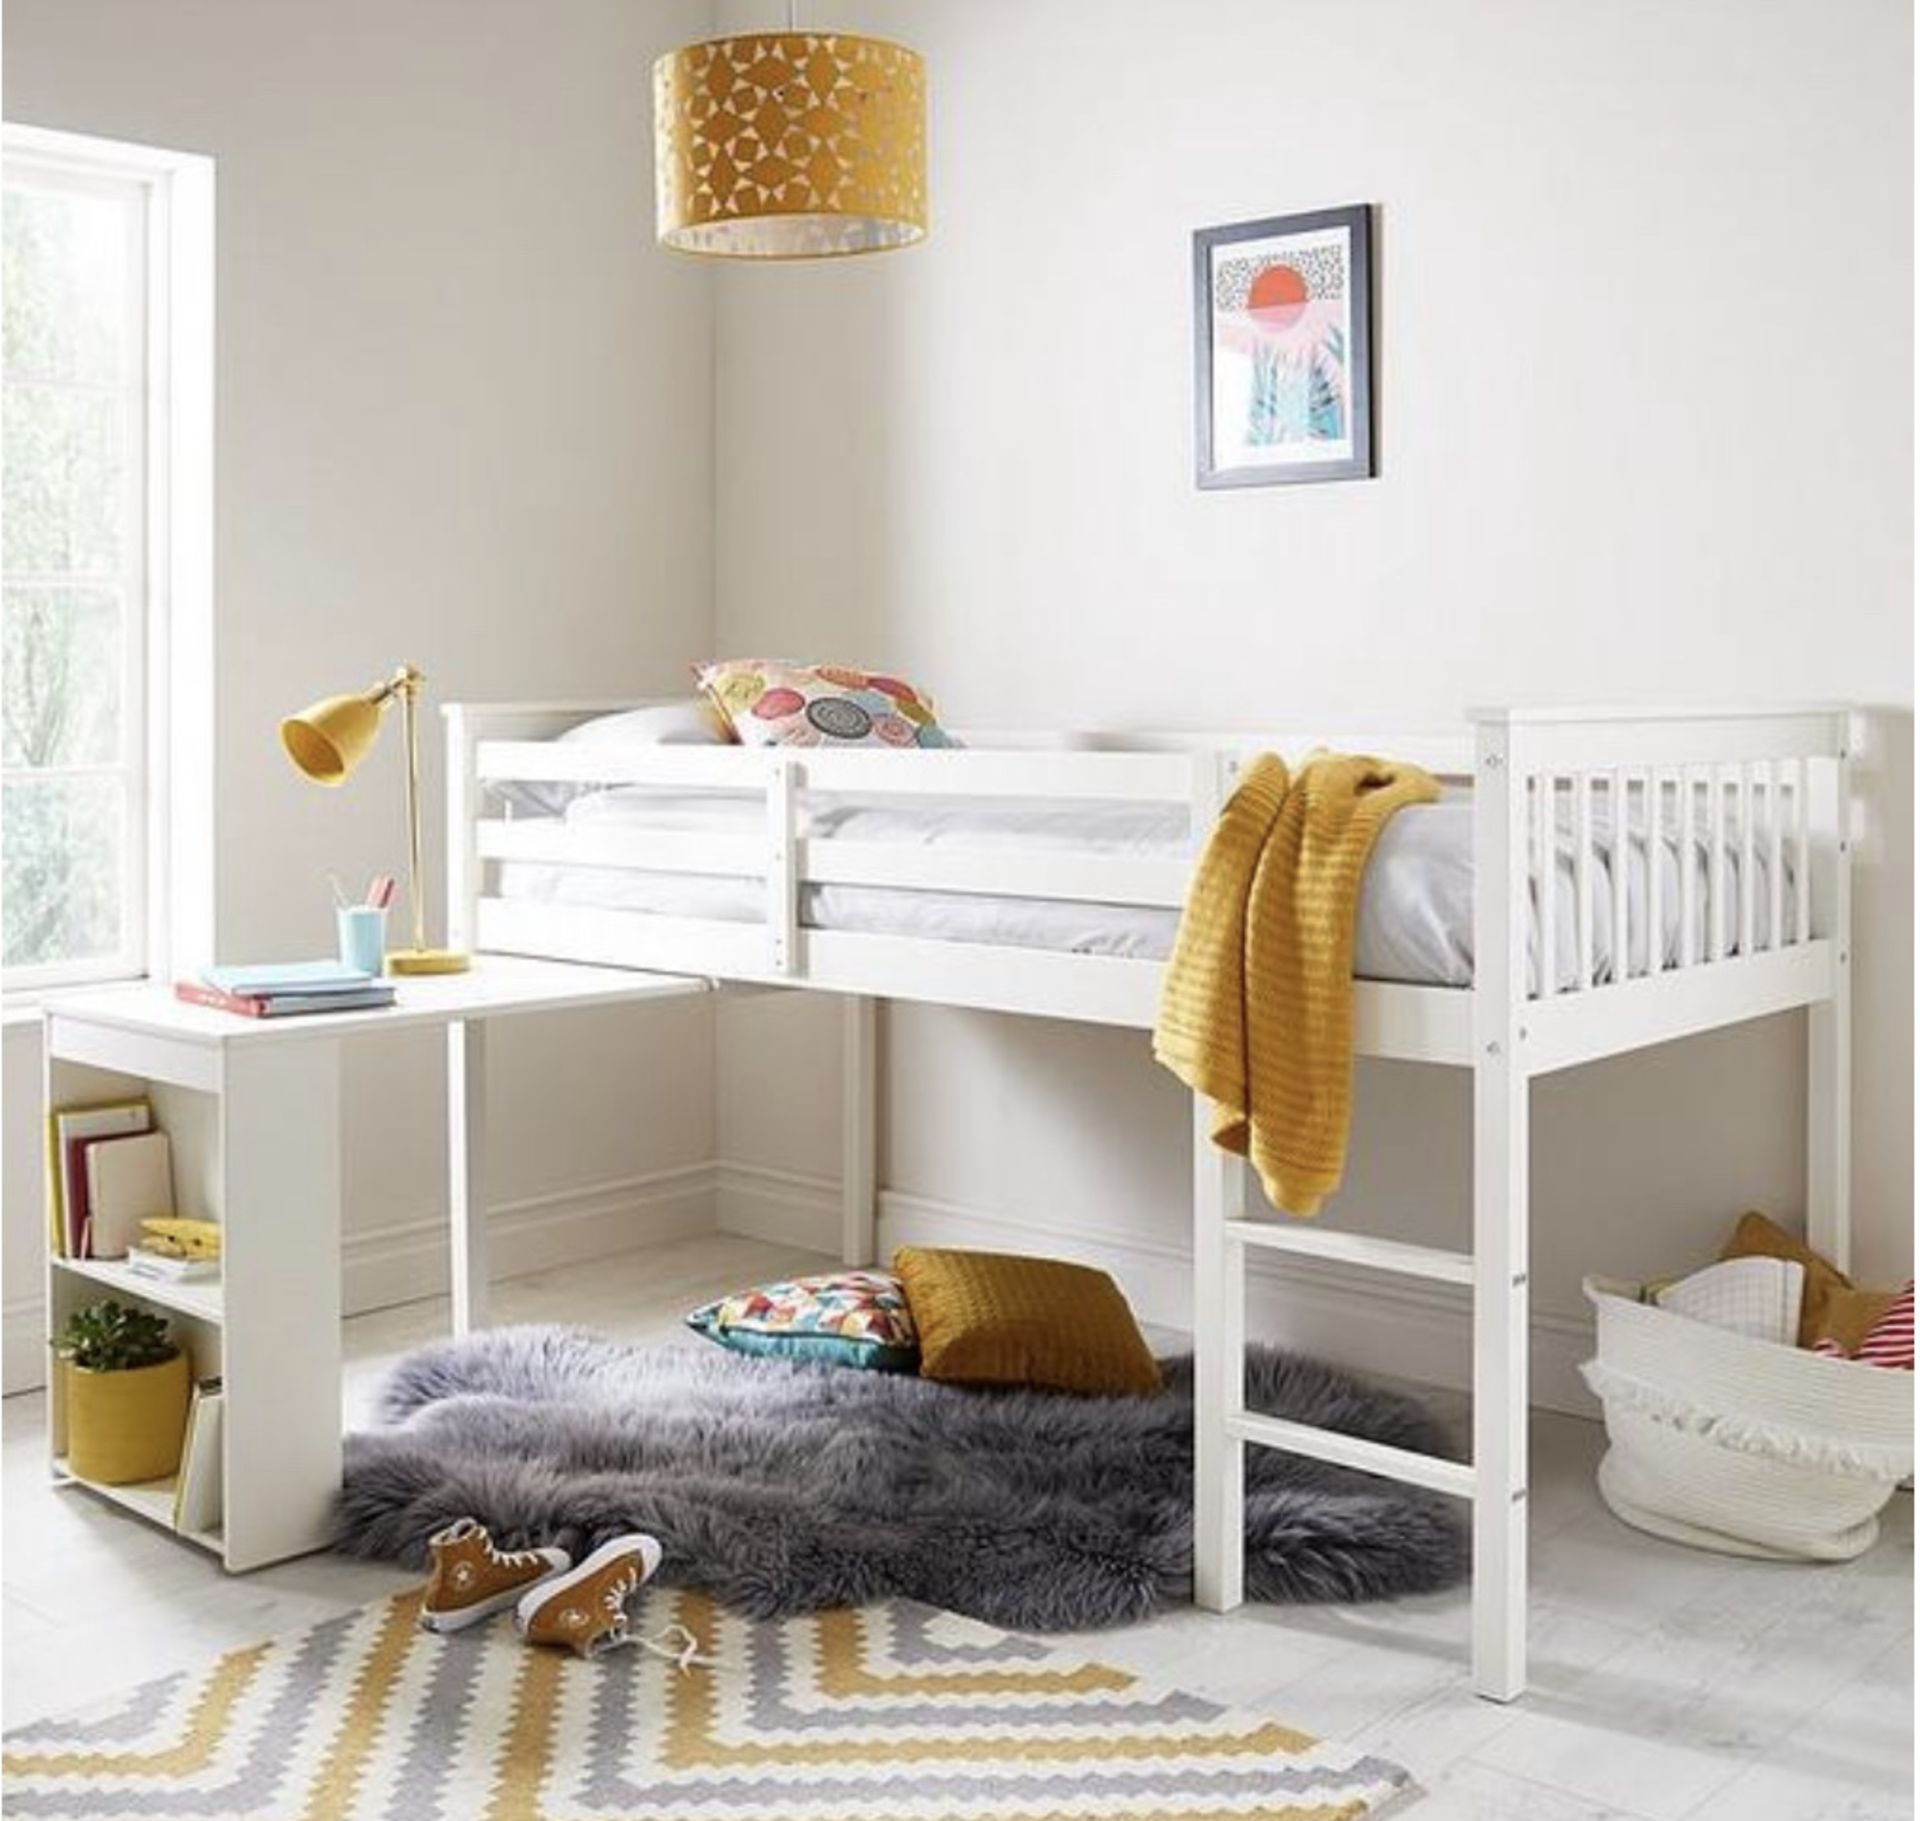 NOVARA MID SLEEPER WITH PULL OUT DESK IN WHITE - RRP £349